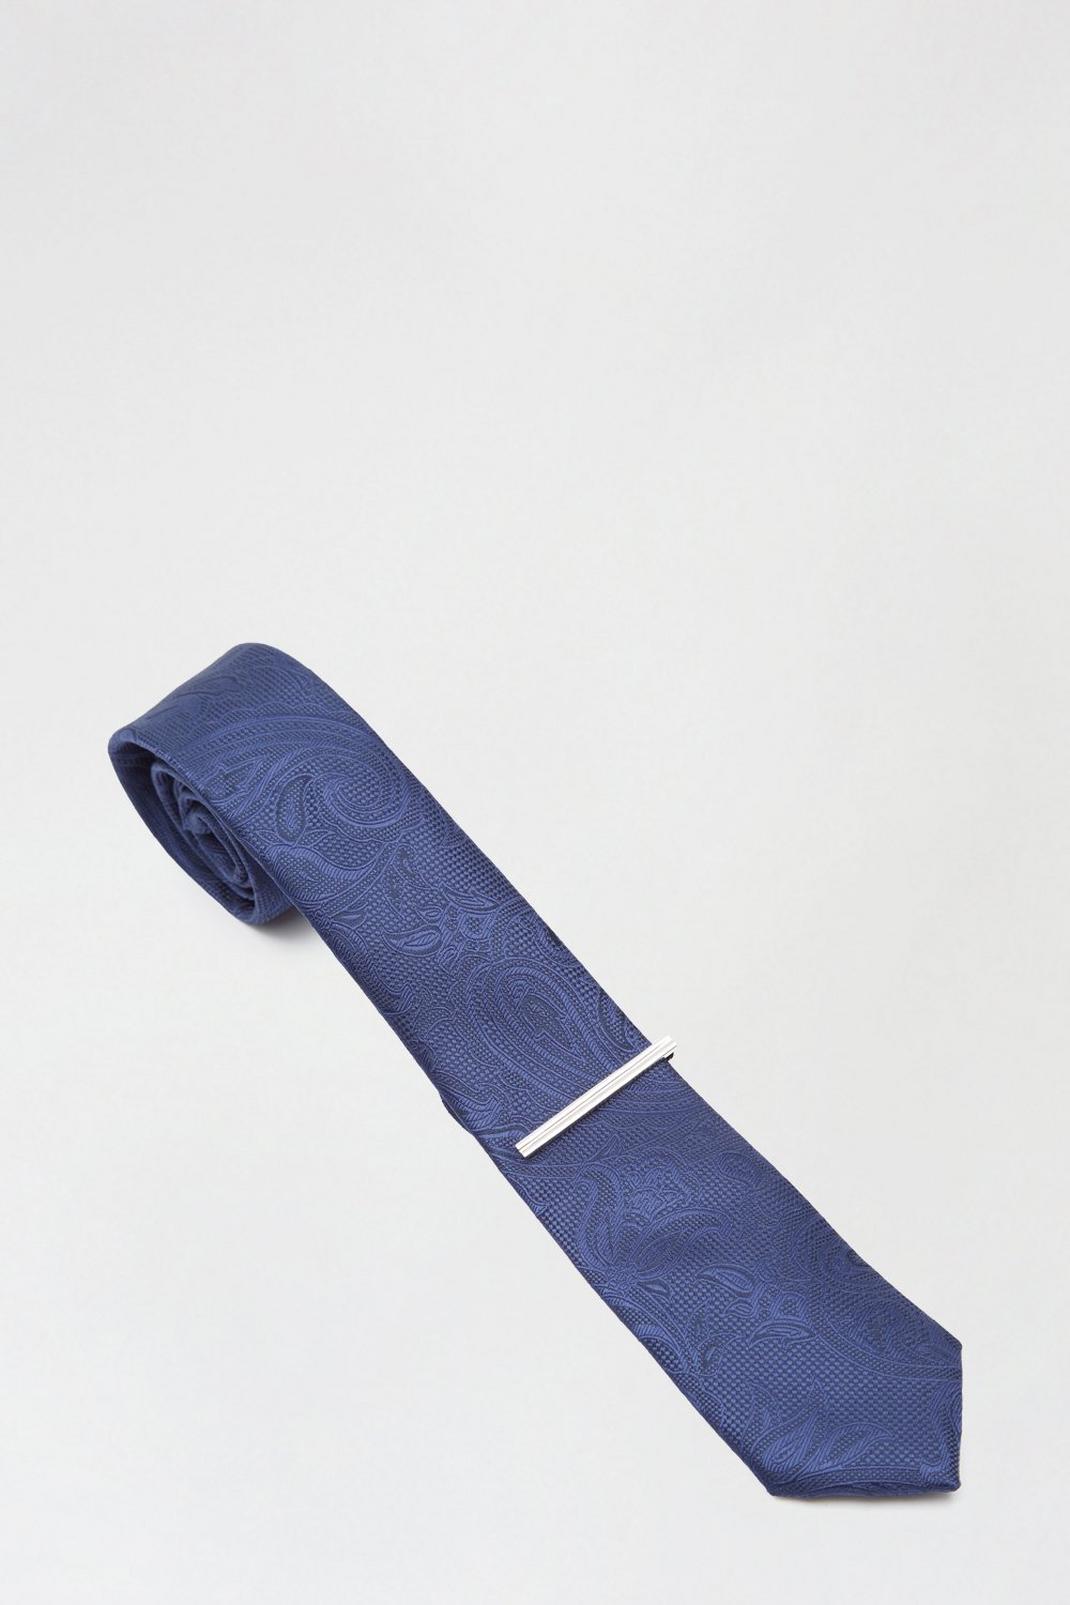 148 Tonal Navy Paisley Tie And Tie Bar image number 2